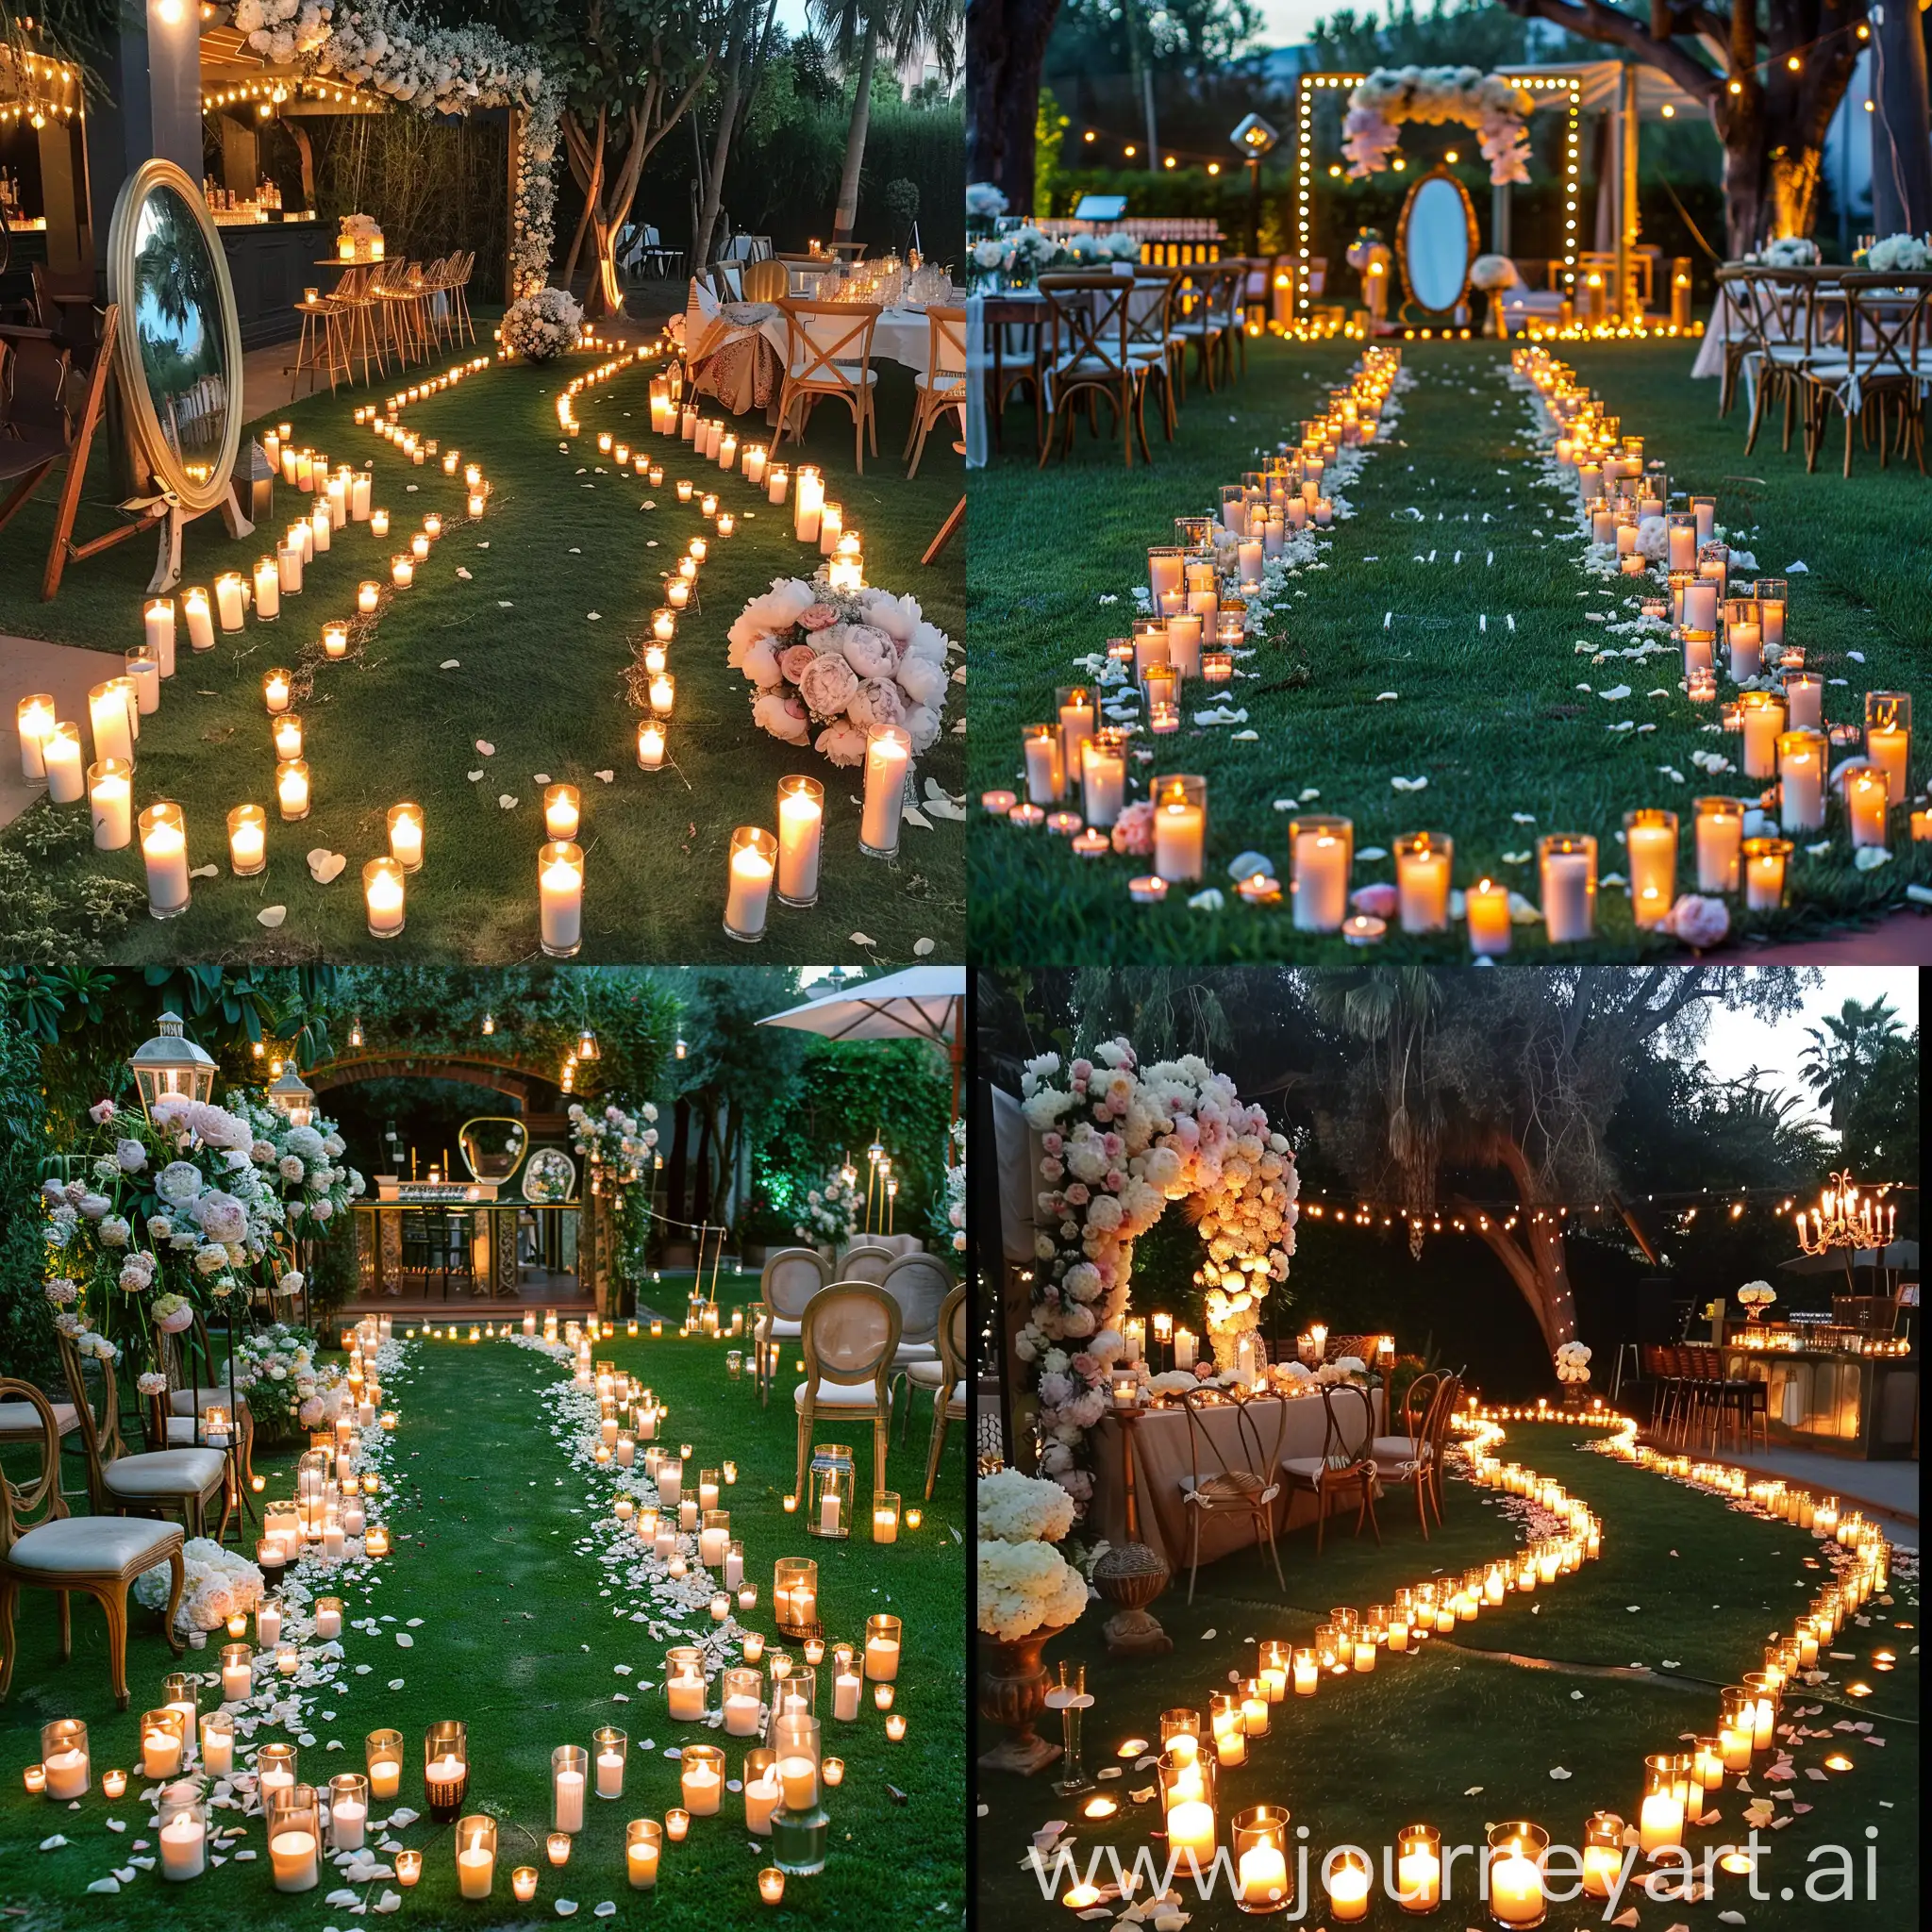 Enchanting-Outdoor-Wedding-Aisle-with-Candlelit-Pathway-and-Floral-Altar